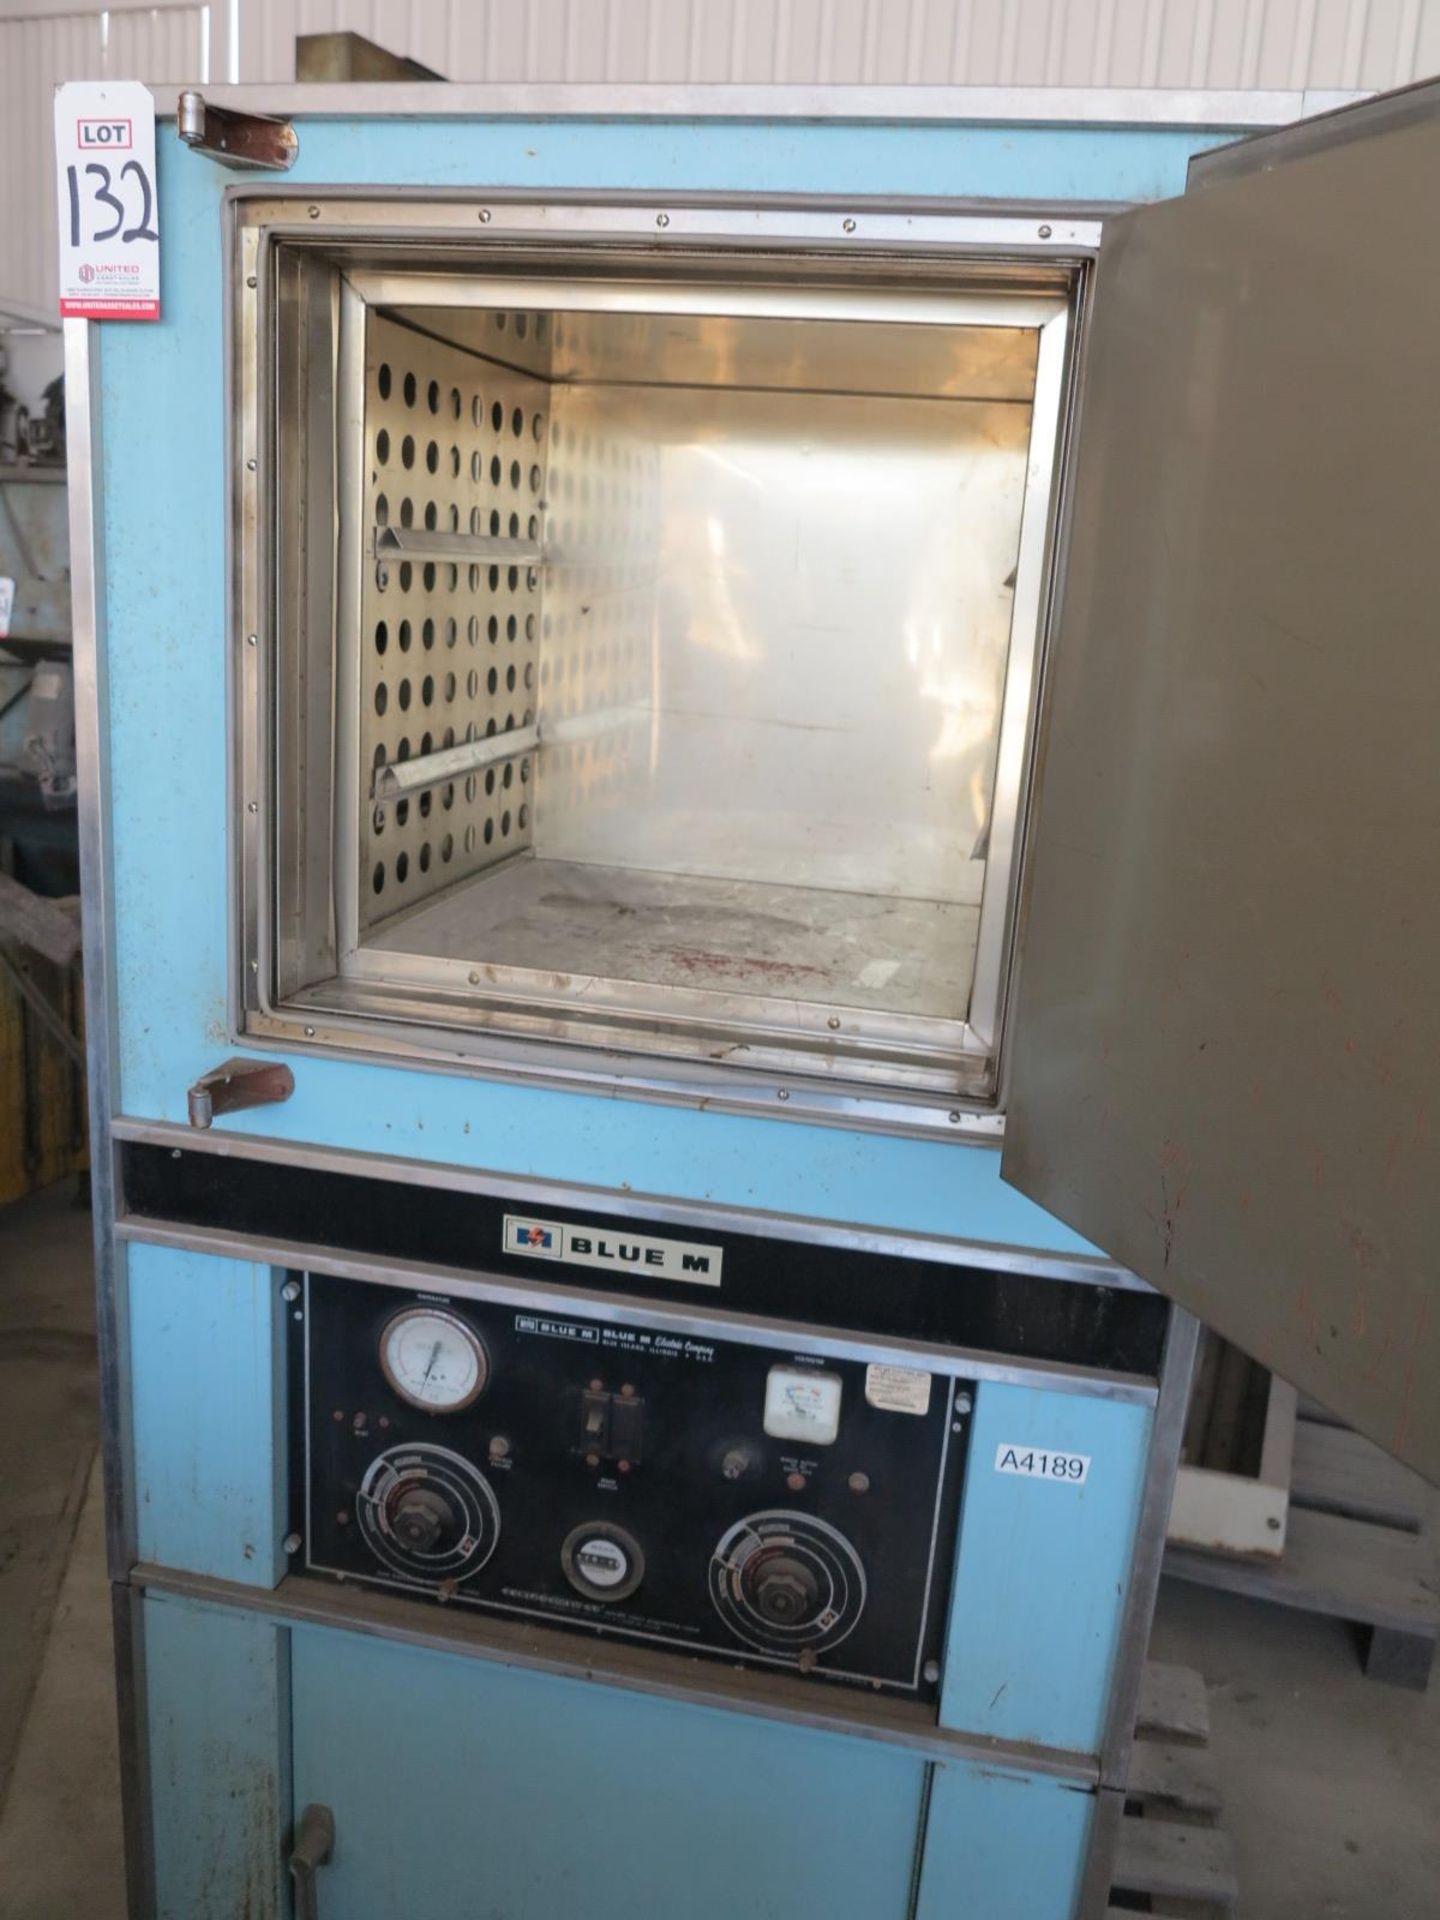 25" X 20" X 20" BLUE M INDUSTRIAL OVEN, MODEL POM-206B-1, STAINLESS STEEL INTERIOR, 1 PASS - Image 2 of 2